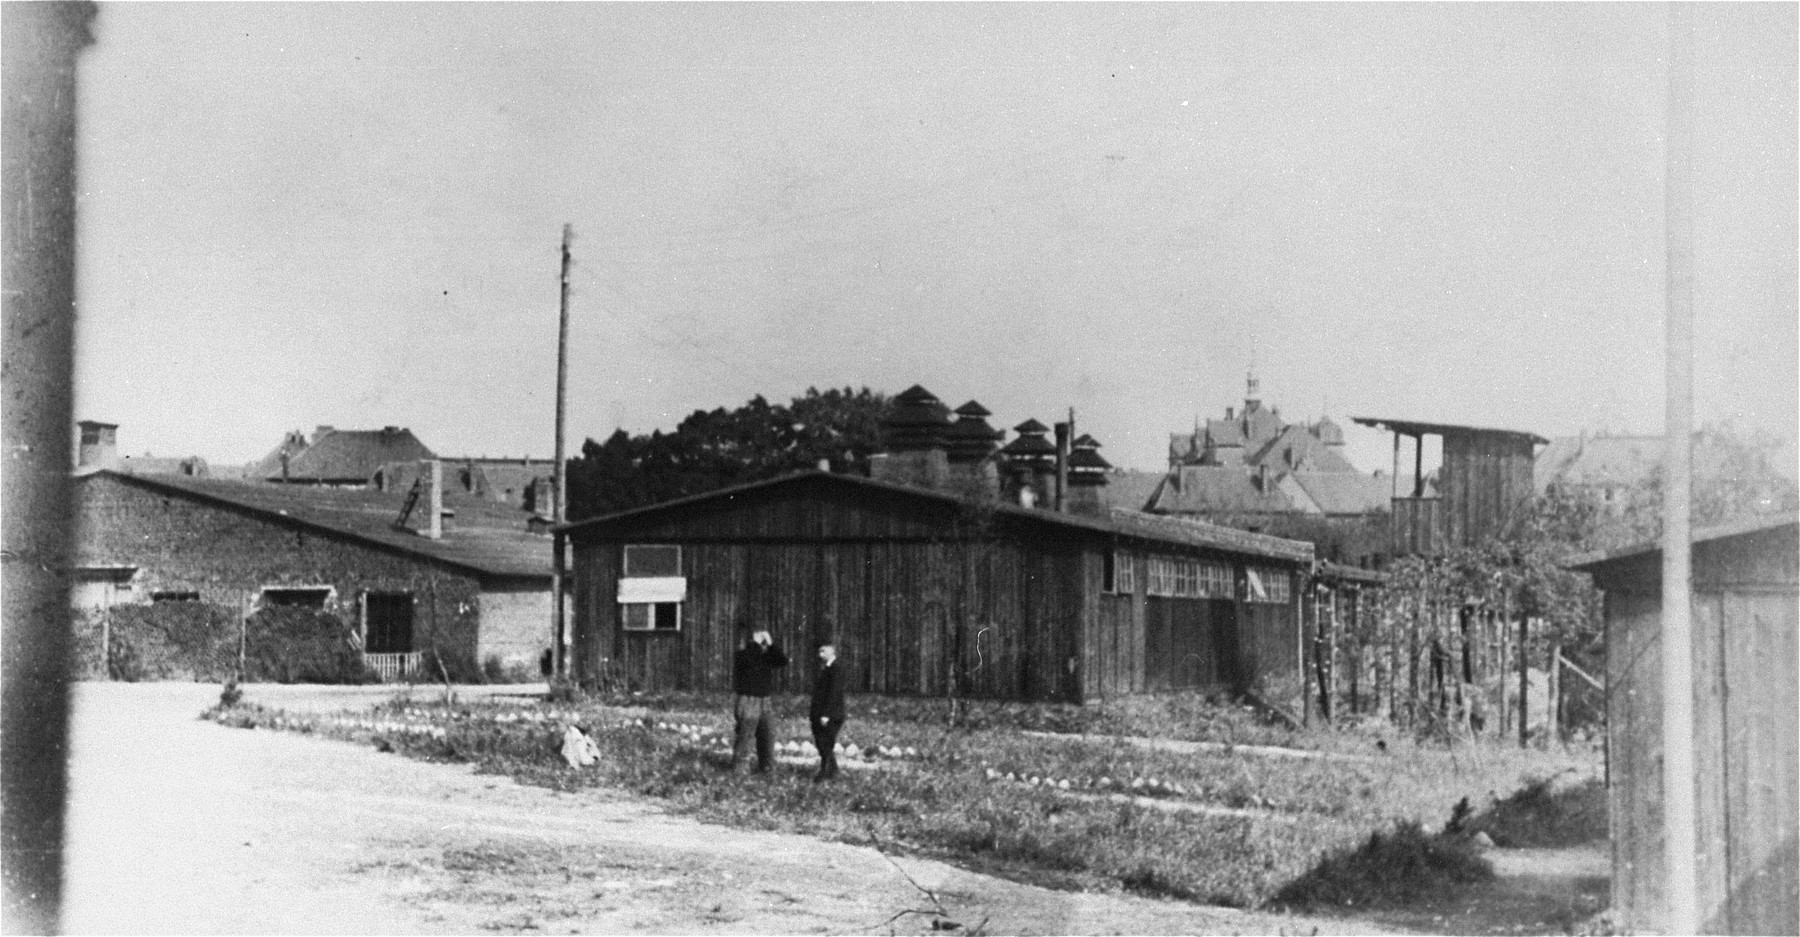 Leon Greenwald (right) and his brother in the Biesnitzer Grund (Goerlitz) concentration camp, a sub-camp of Gross-Rosen.